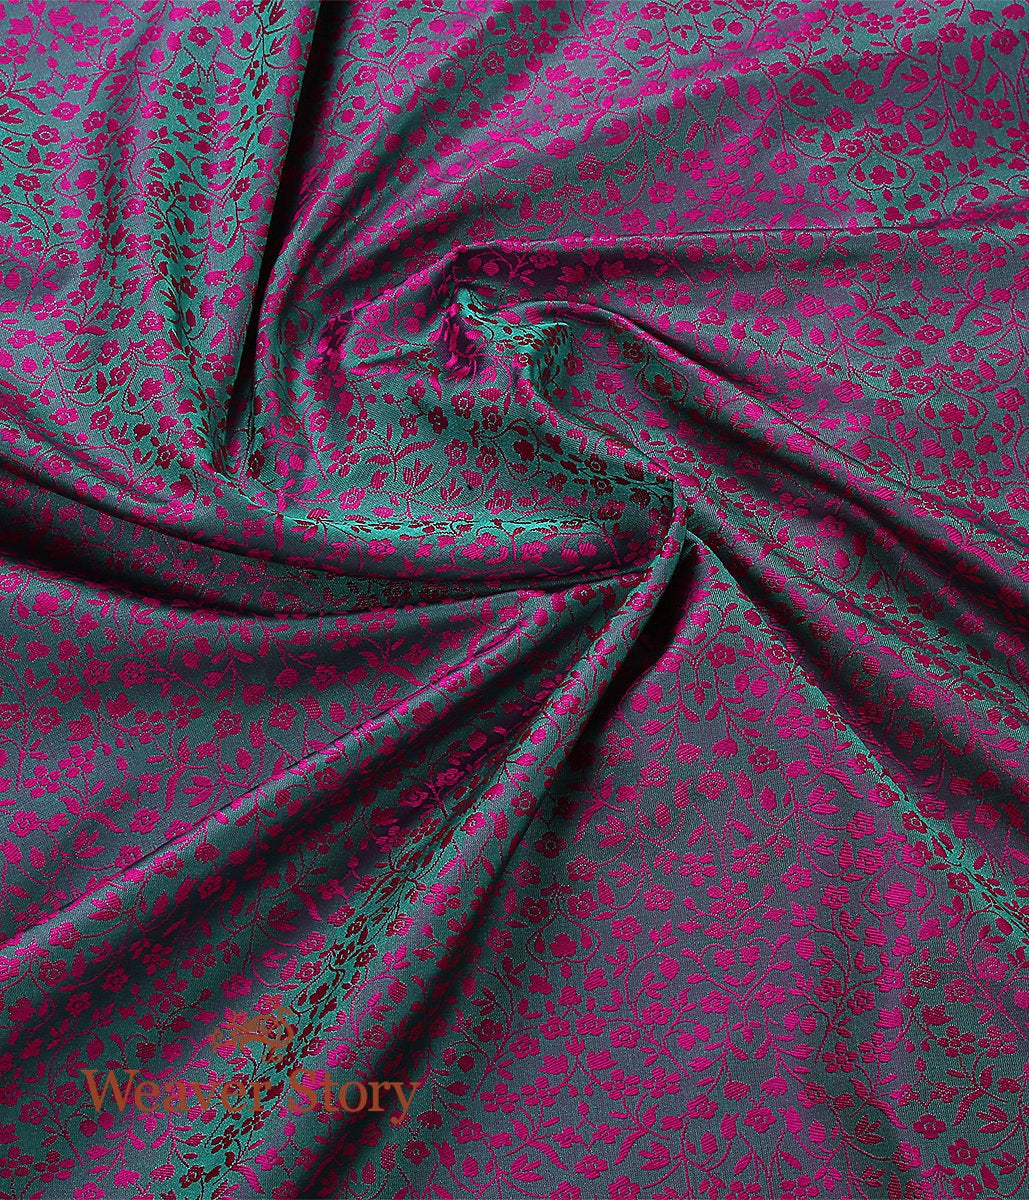 Handloom_Green_and_Pink_Self_Tanchoi_Fabric_WeaverStory_05